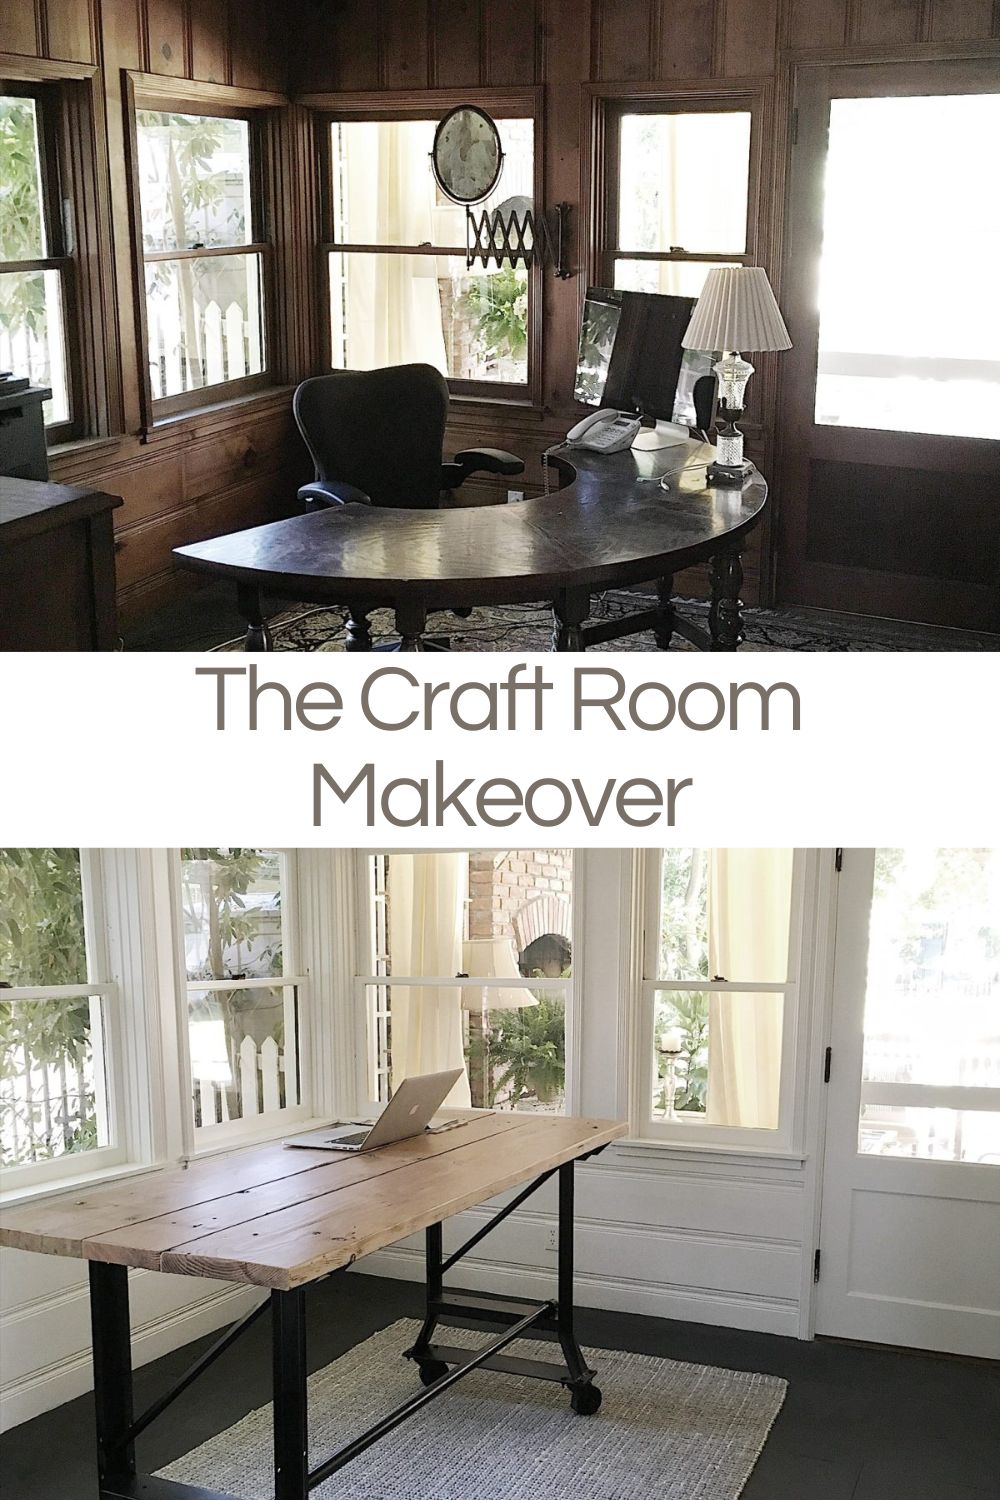 Every time I look at my craft room I cannot believe the before and after. If you haven't seen this, you won't believe it. I love this after photo!